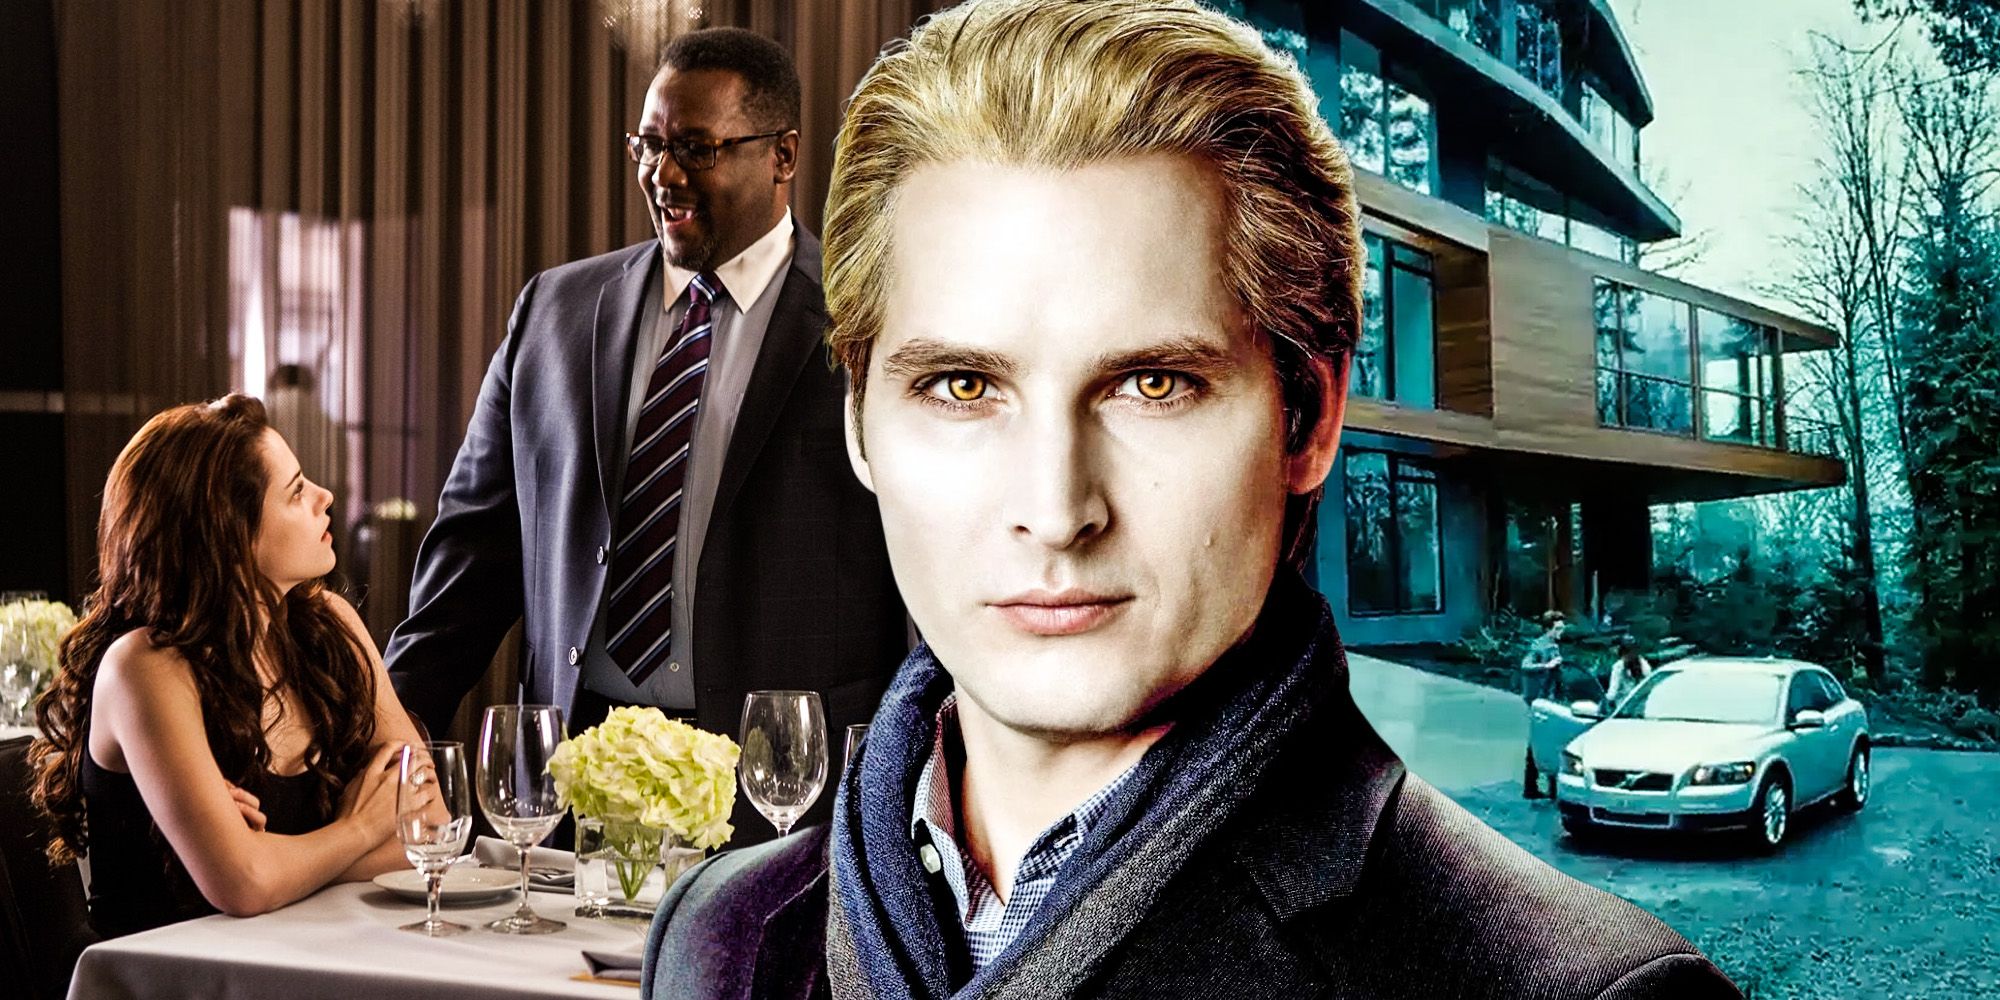 Why Carlisle Cullen Has No Powers In The Twilight Movies